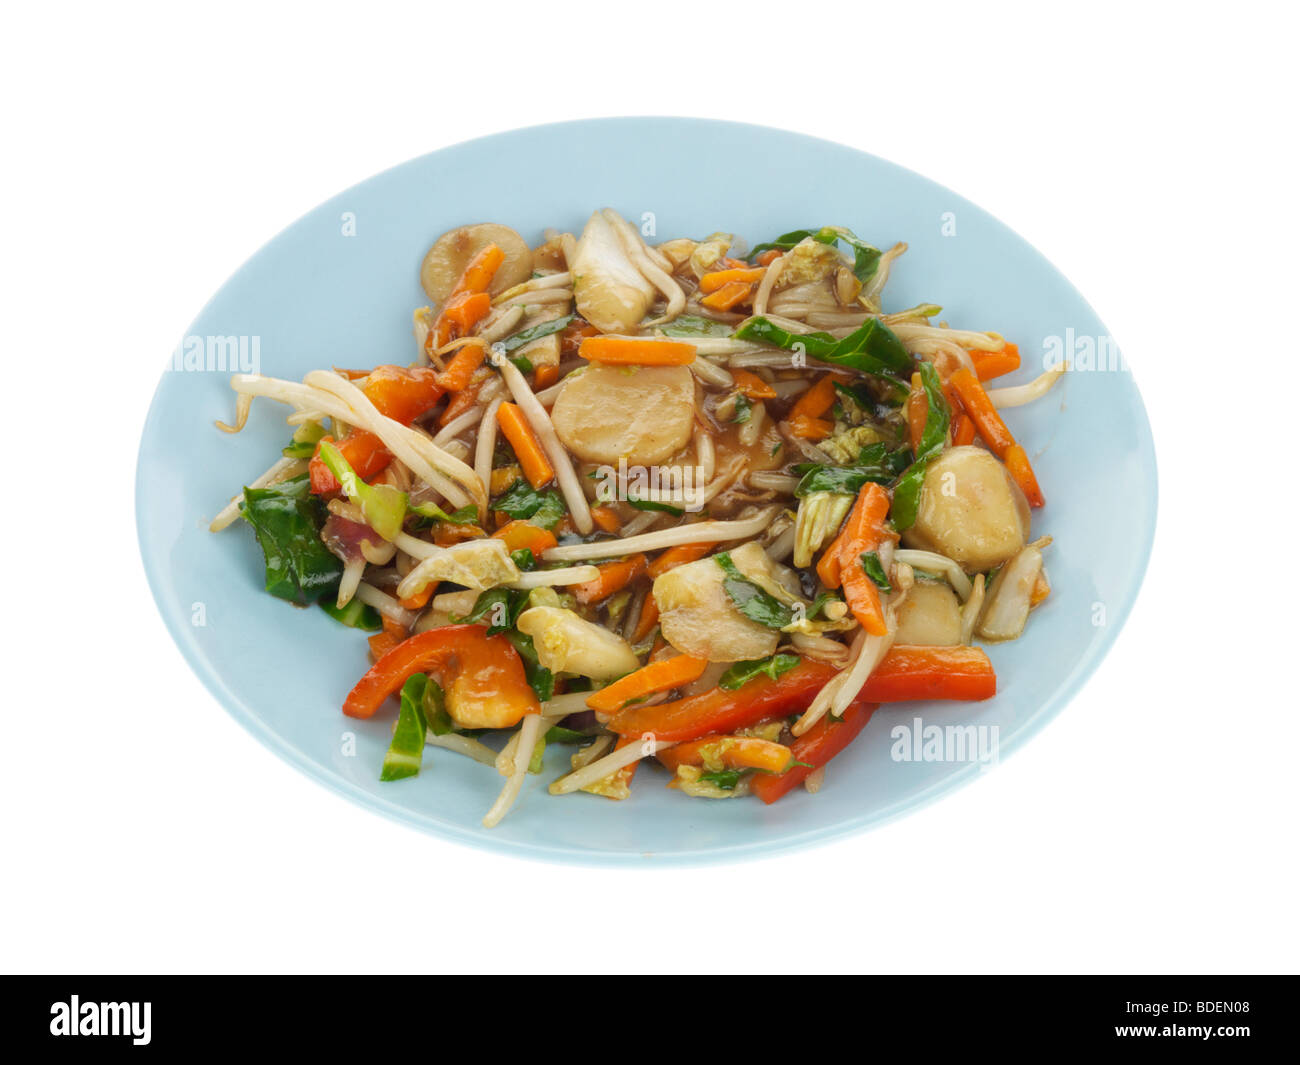 Stirfry Vegetables in Chow Mein Sauce Stock Photo